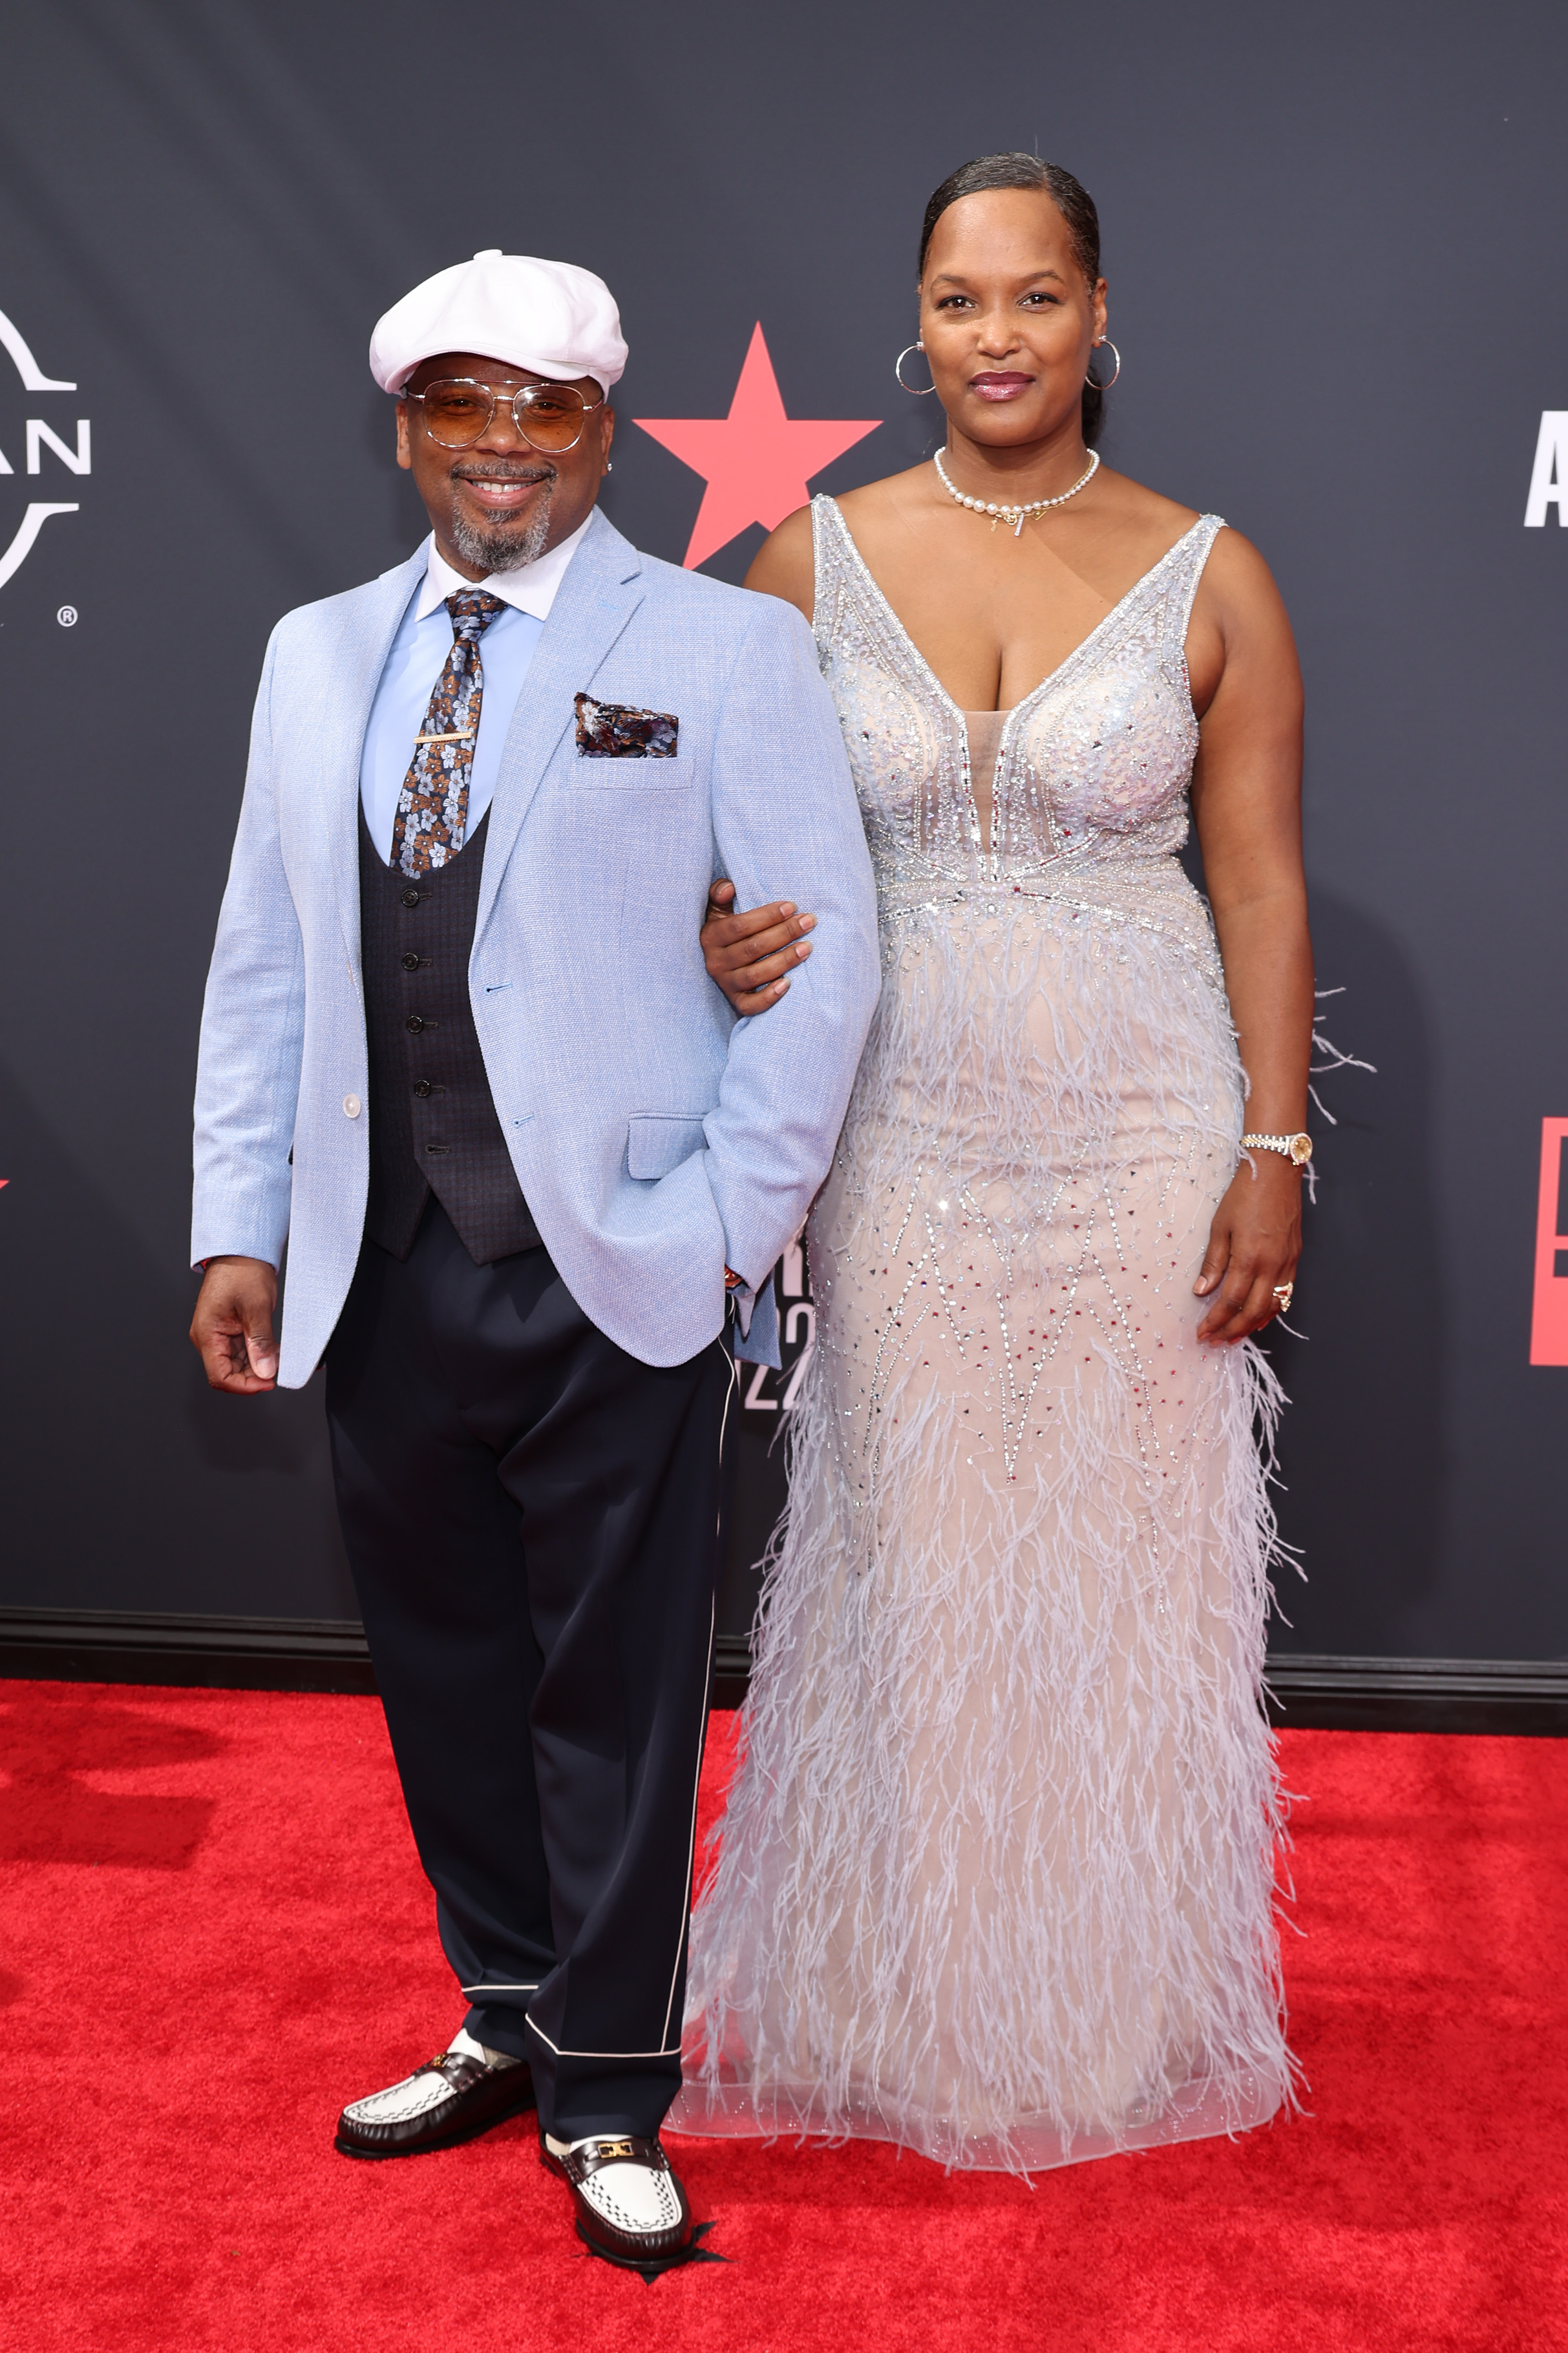 Carl Anthony Payne II and Melika Payne attend the 2022 BET Awards at Microsoft Theater on June 26, 2022, in Los Angeles, California. | Source: Getty Images